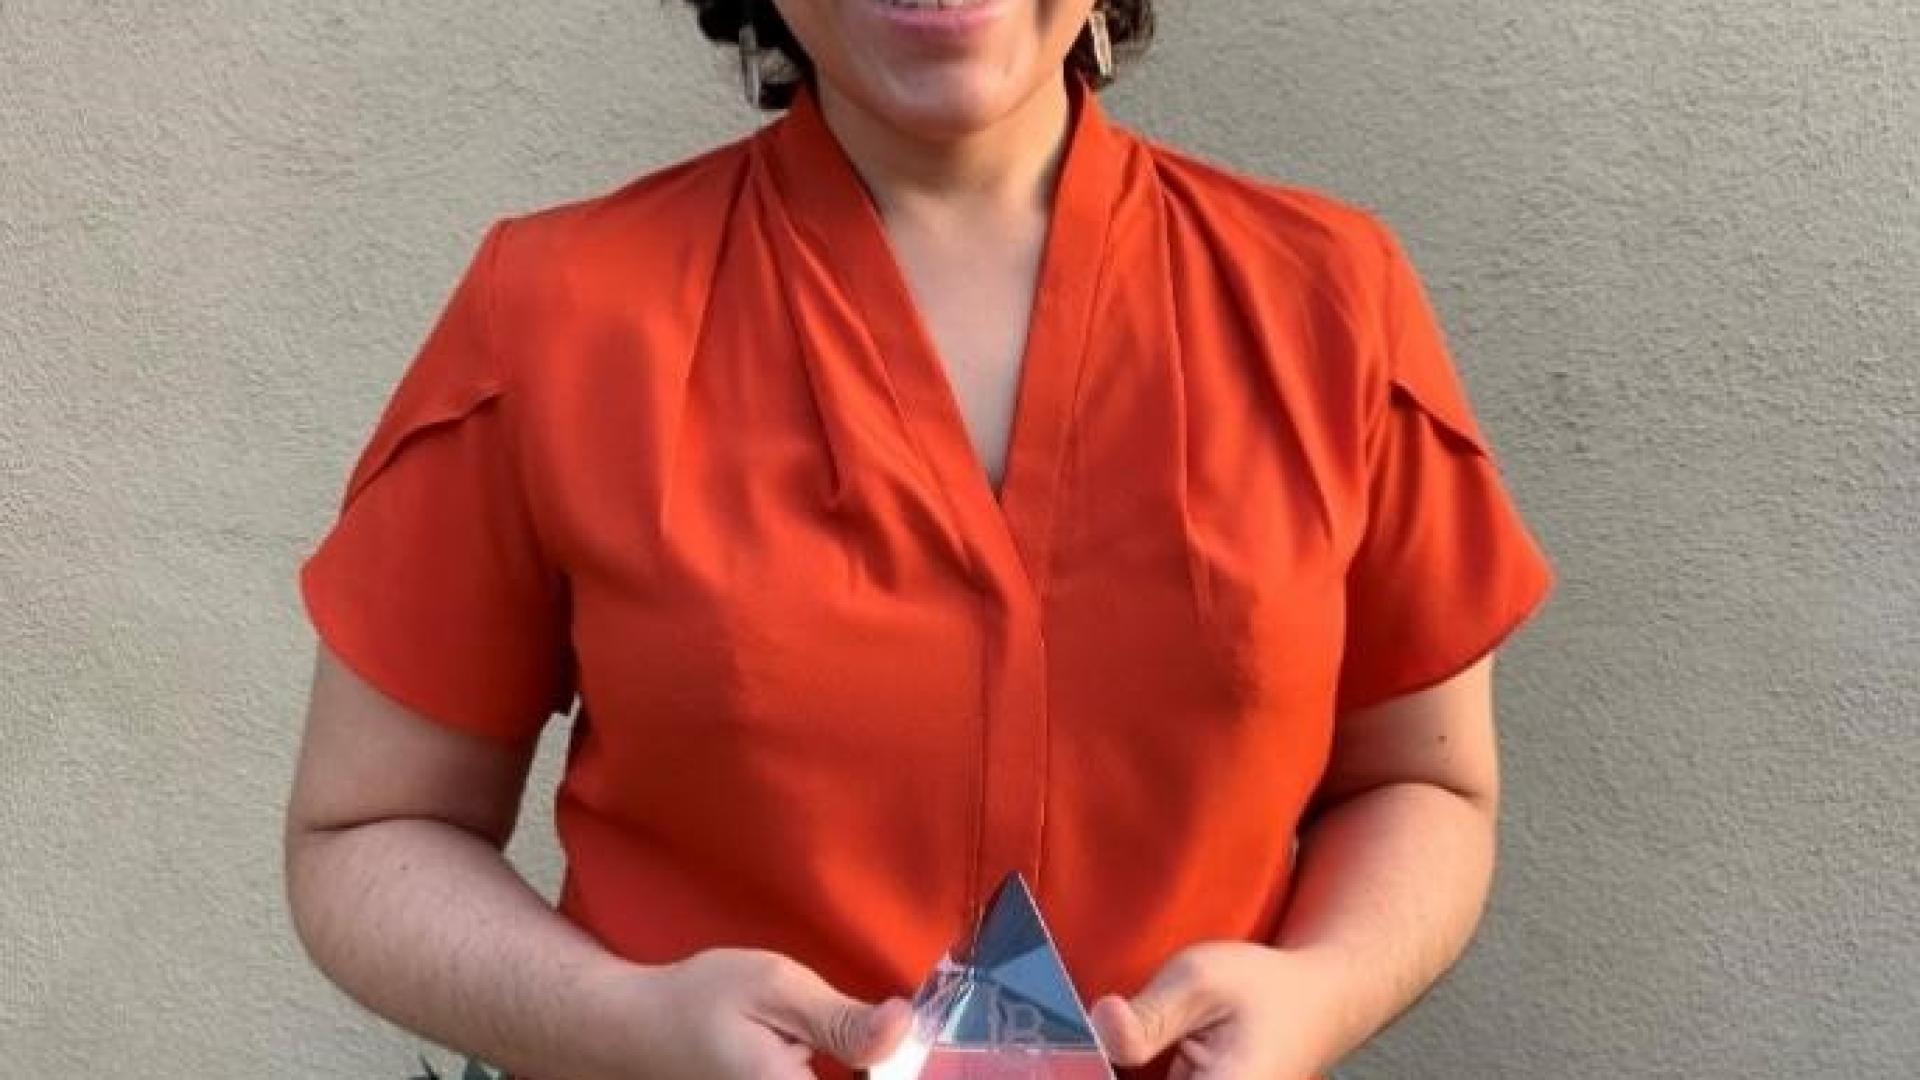 Lizette Alvarez College of Business Staff of the Year 2021